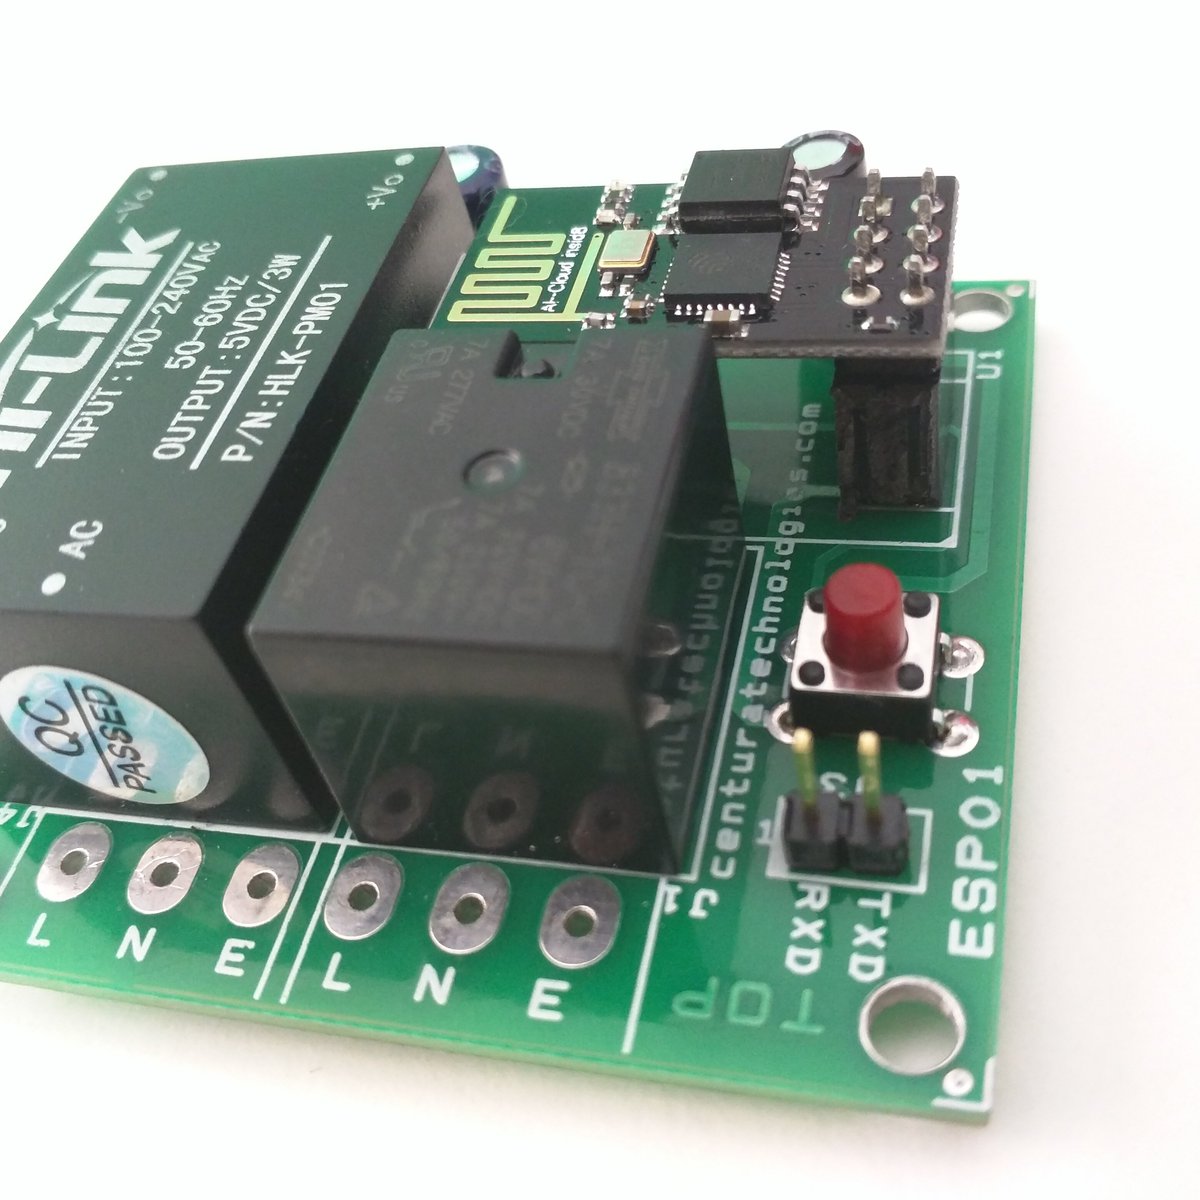 ESP8266 Network Relay WIFI Module from MMM999 on Tindie